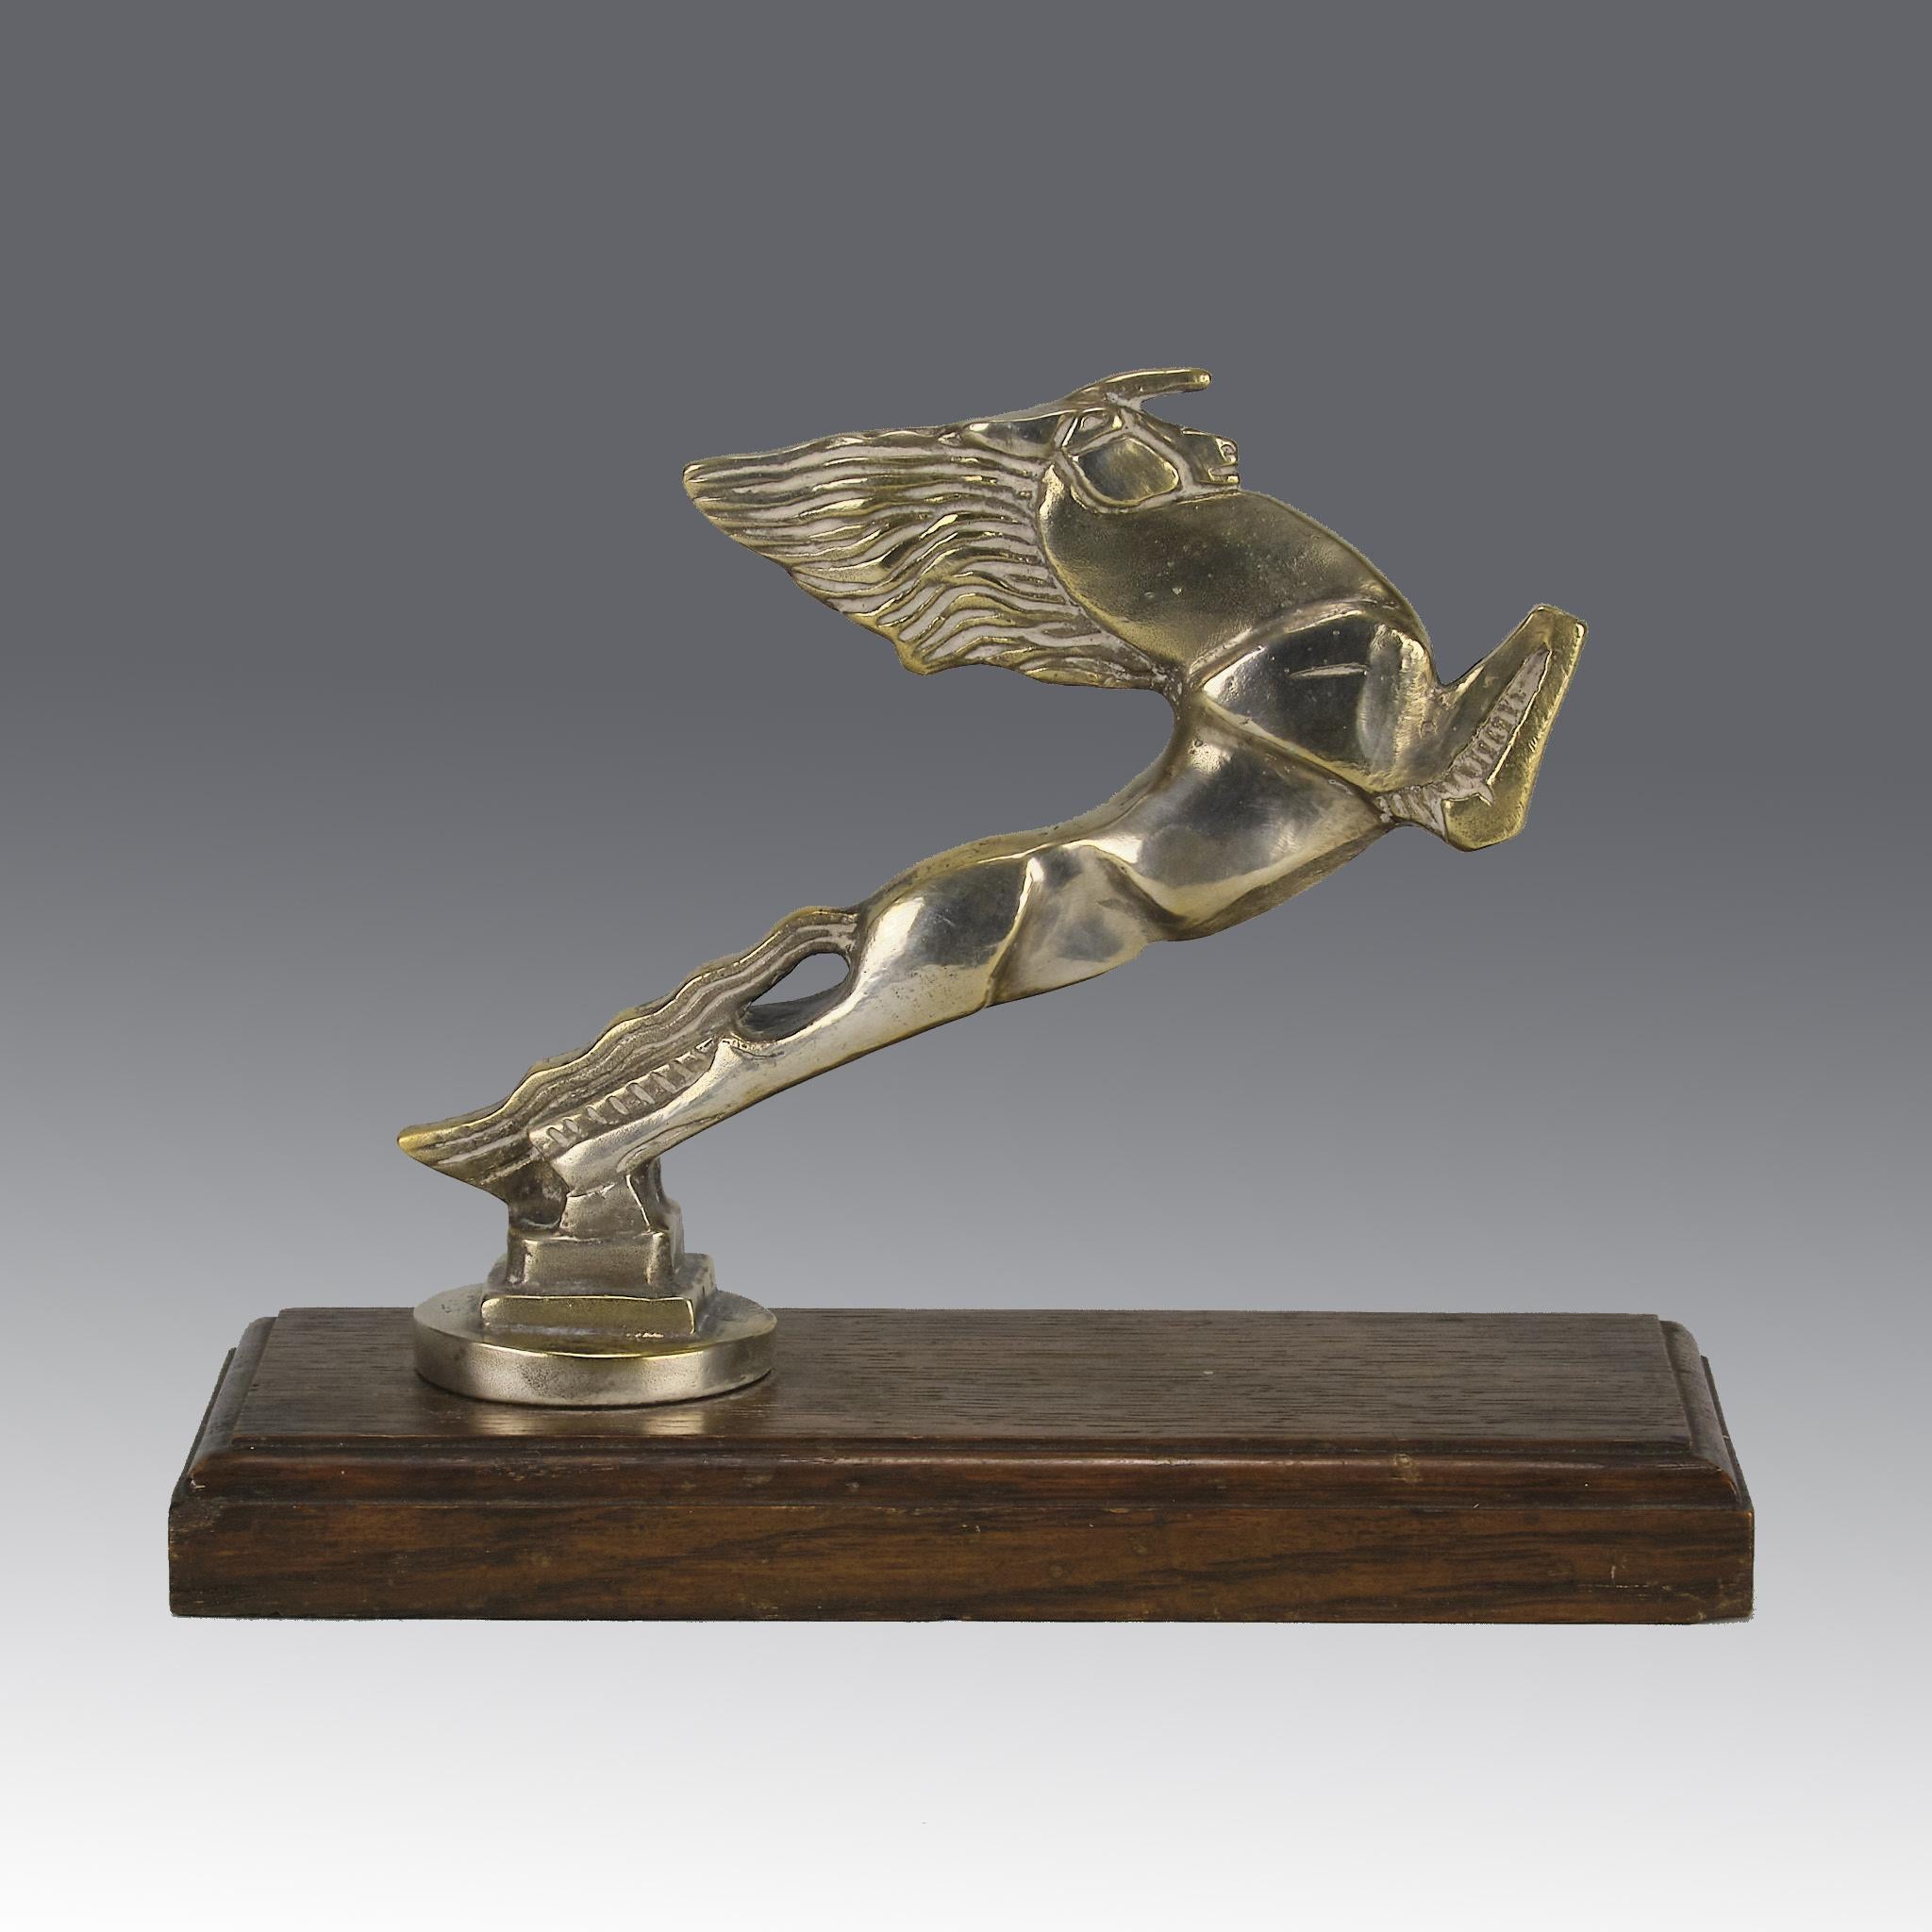 A striking mid 20th Century Art Deco silver plated bronze car mascot in the form of a leaping horse, with fine detail. Raised on a wooden rectangular base, signed Bazin

ADDITIONAL INFORMATION
Height: 18 cm 

Width: 16 cm

Depth: 10